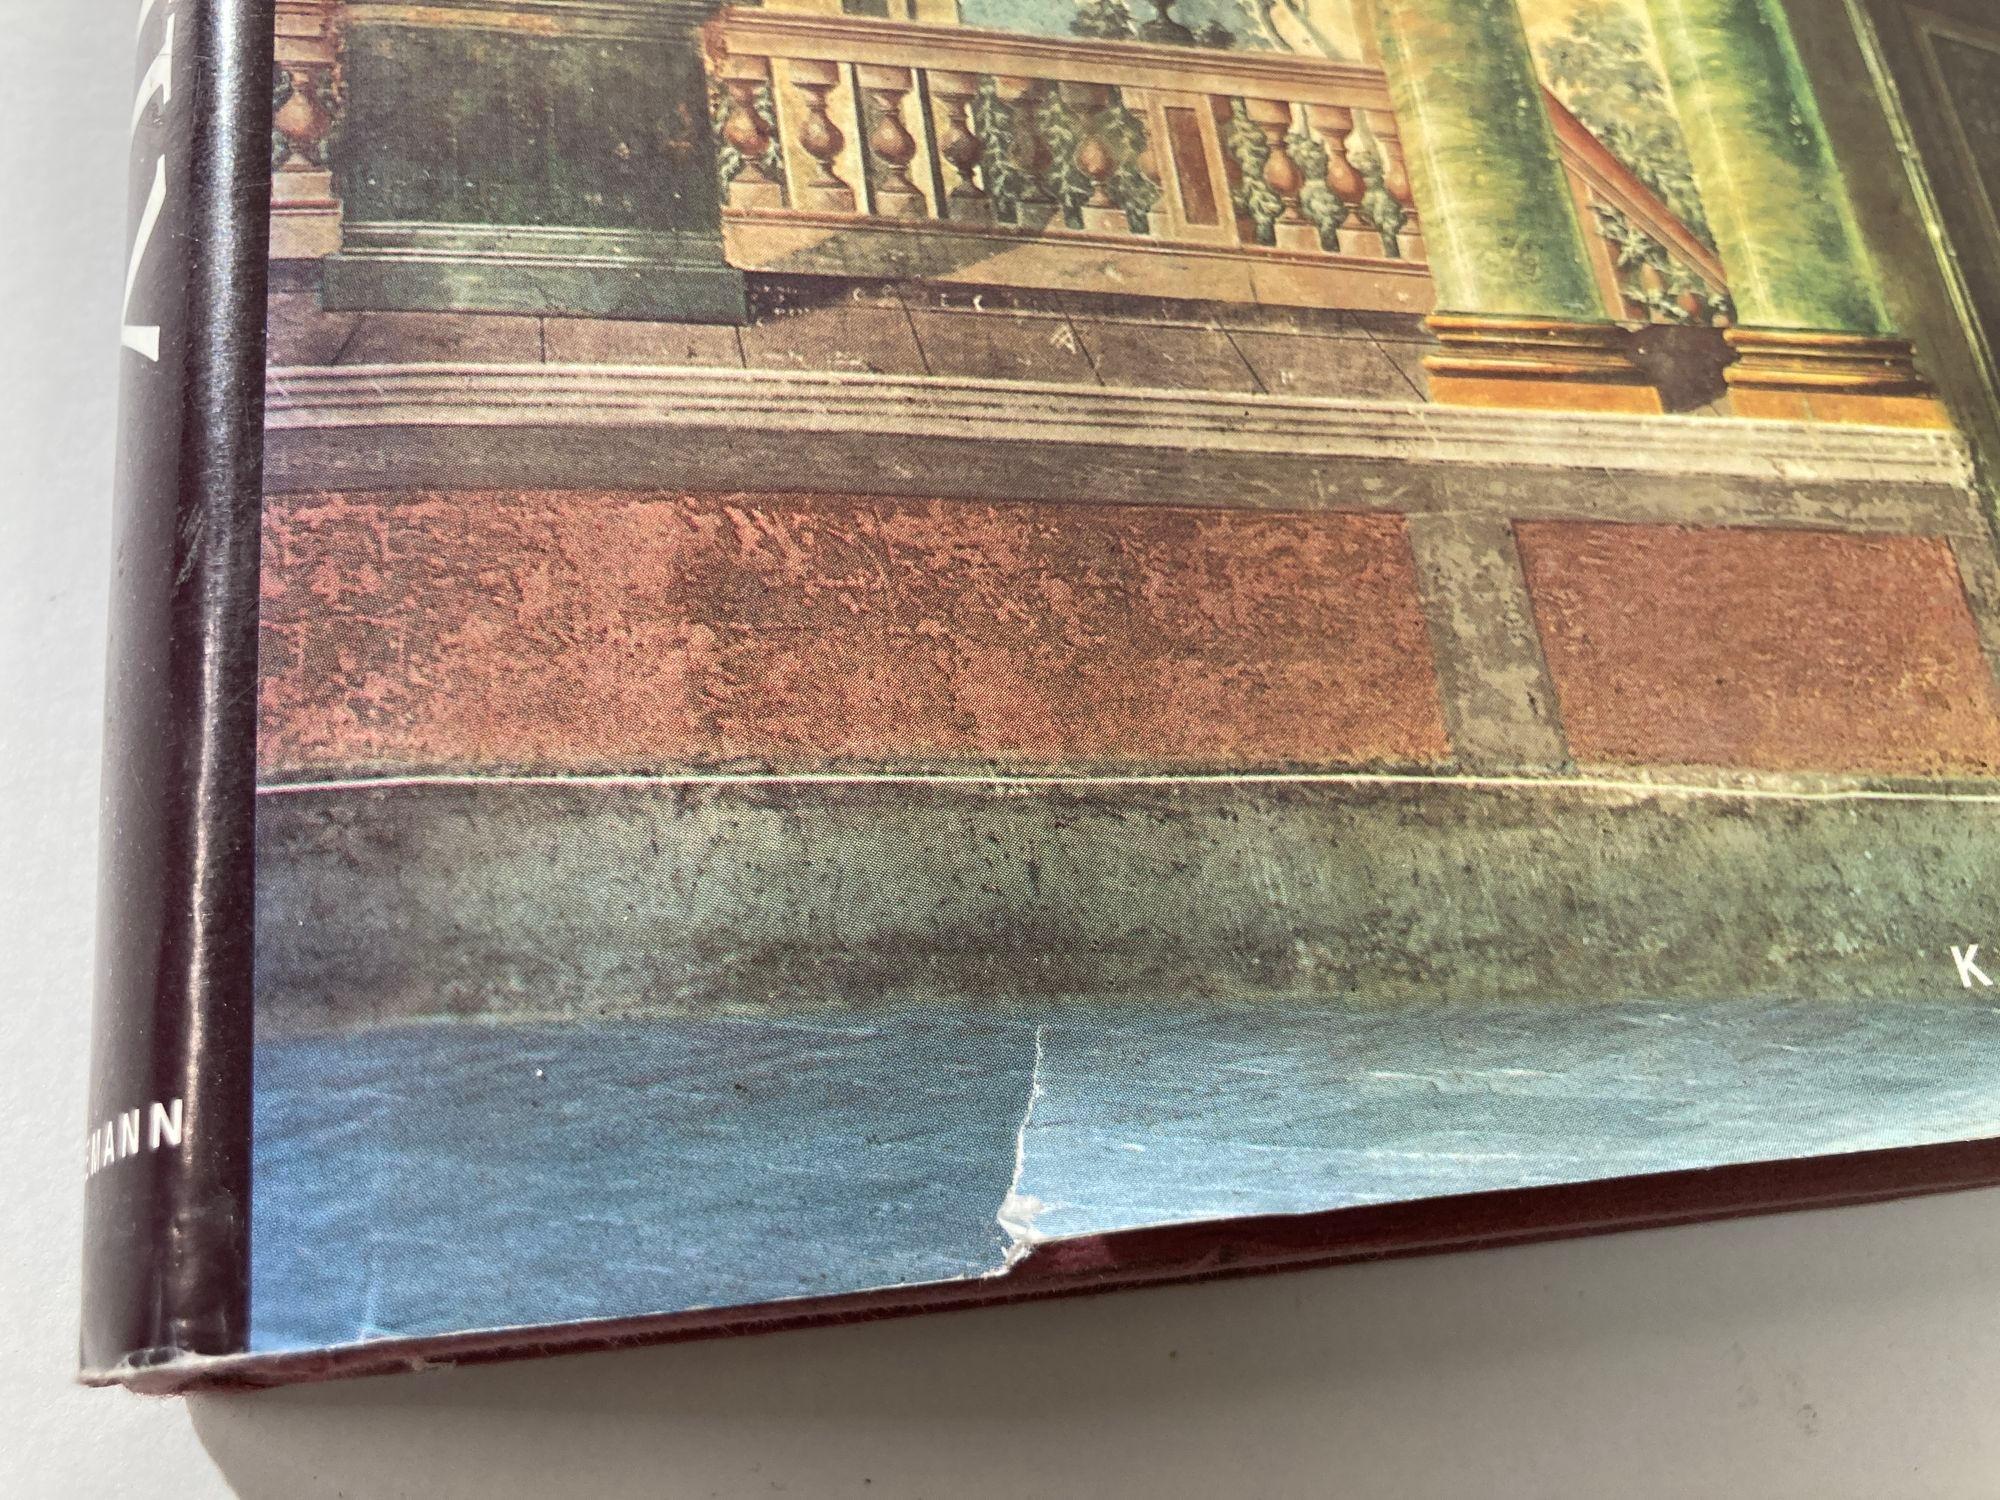 Palazzi of Sicily by Angheli Zalapi Hardcover Book, Italy For Sale 6